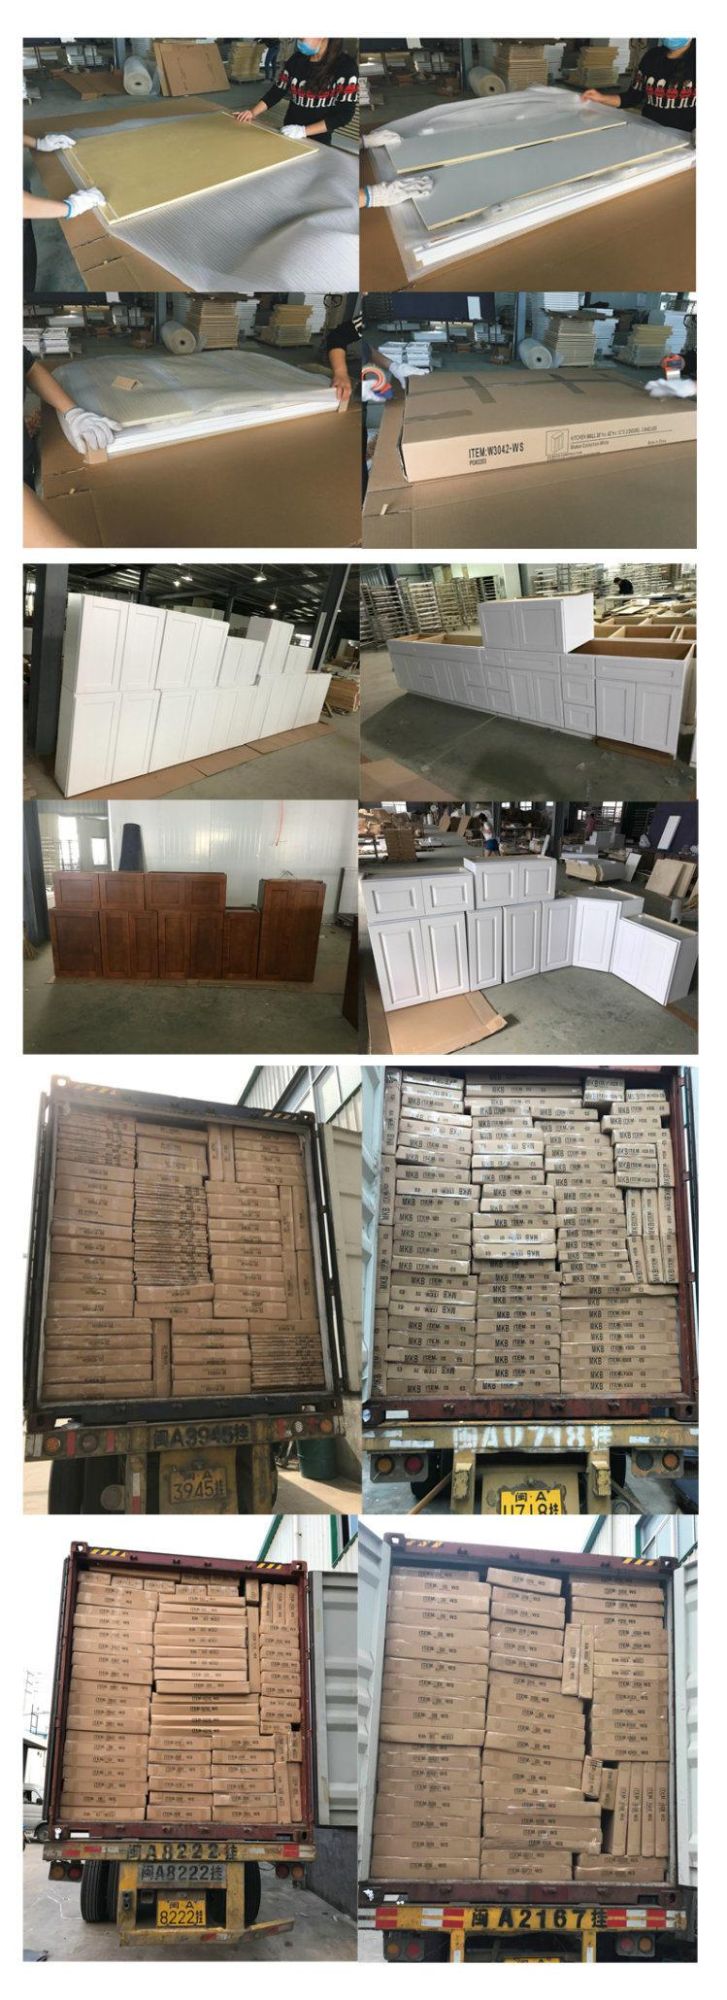 OEM Cabinext Modern Kd (Flat-Packed) Customized Fuzhou China Furnitures Stainless Steel Cabinet Kitchen Cabinets CB008